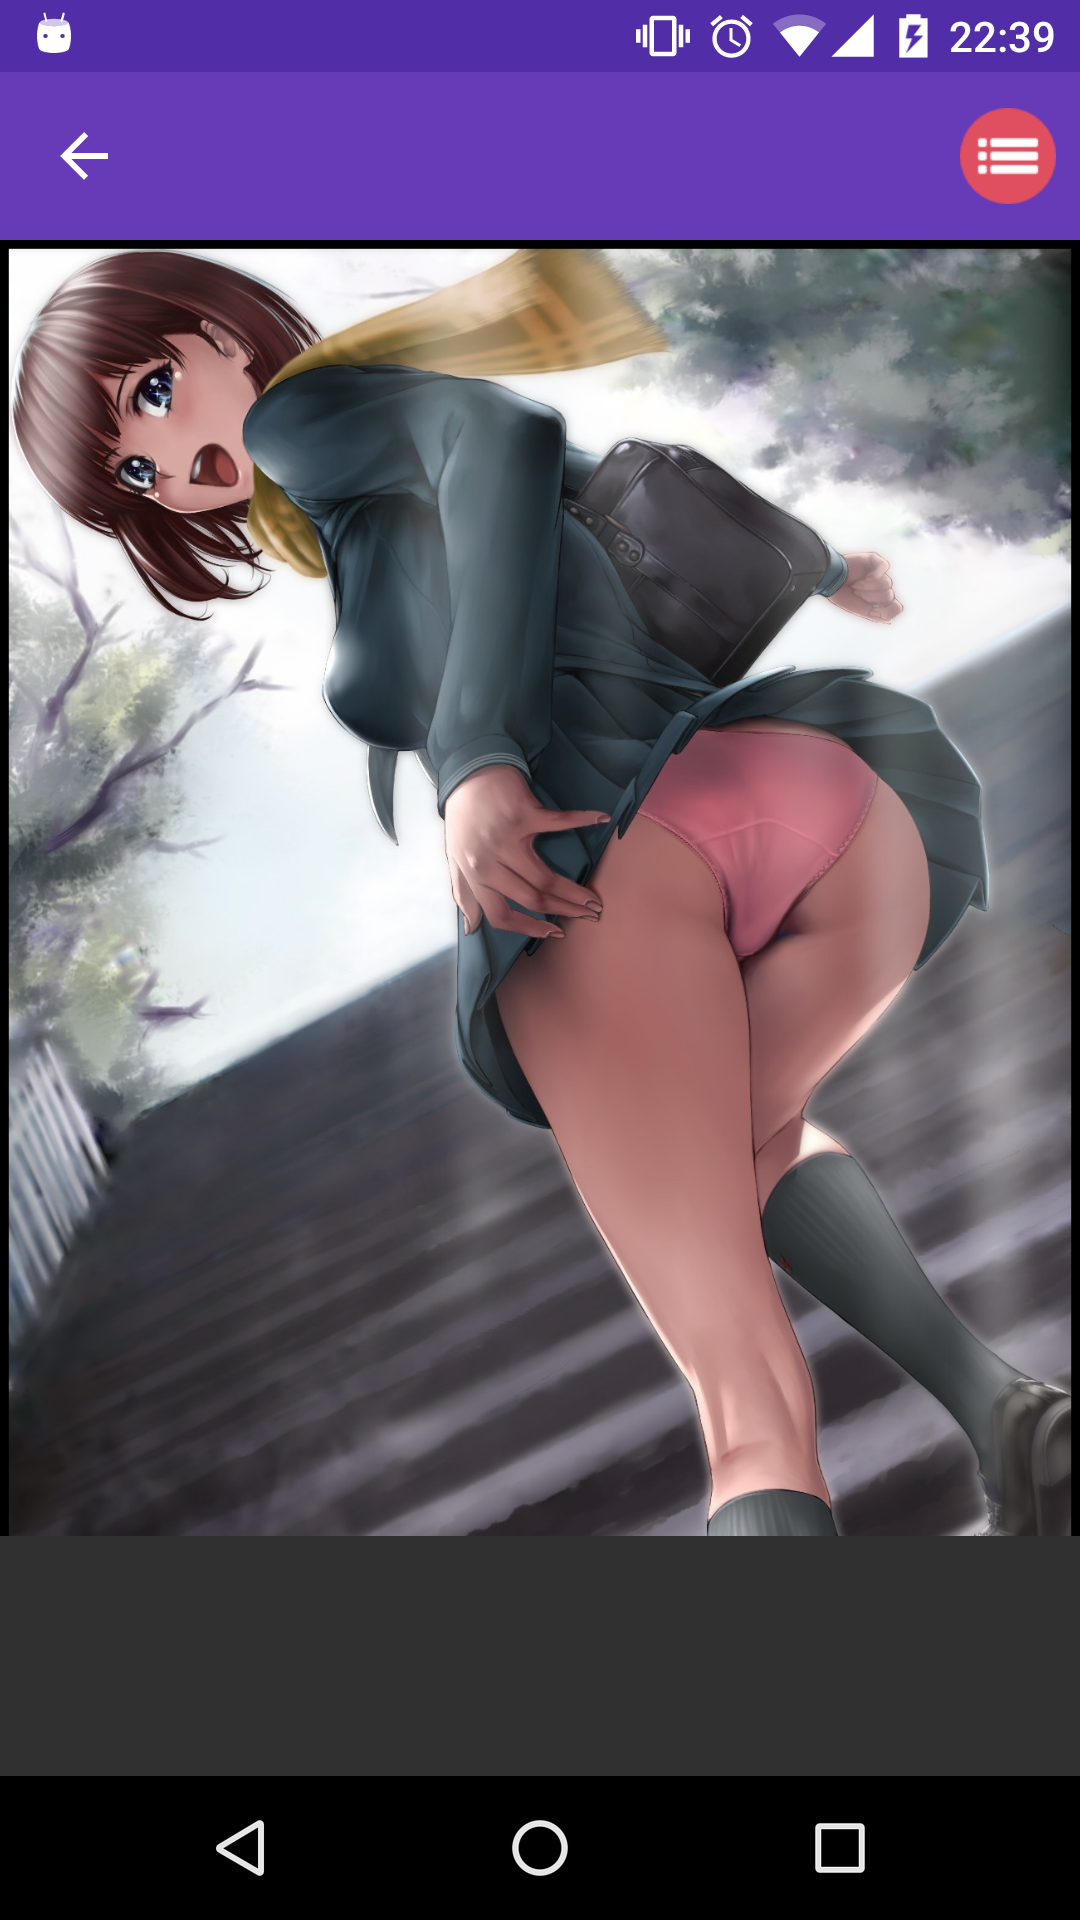 Anime Girls Backgrounds photos,android,porn,sexy,hentai,girls,erotic,pornstars,pic,pornstar,anime,backgrounds,app,download,wallpapers,appa,apps,wallpaper,for,apk,mature,pics,lisa